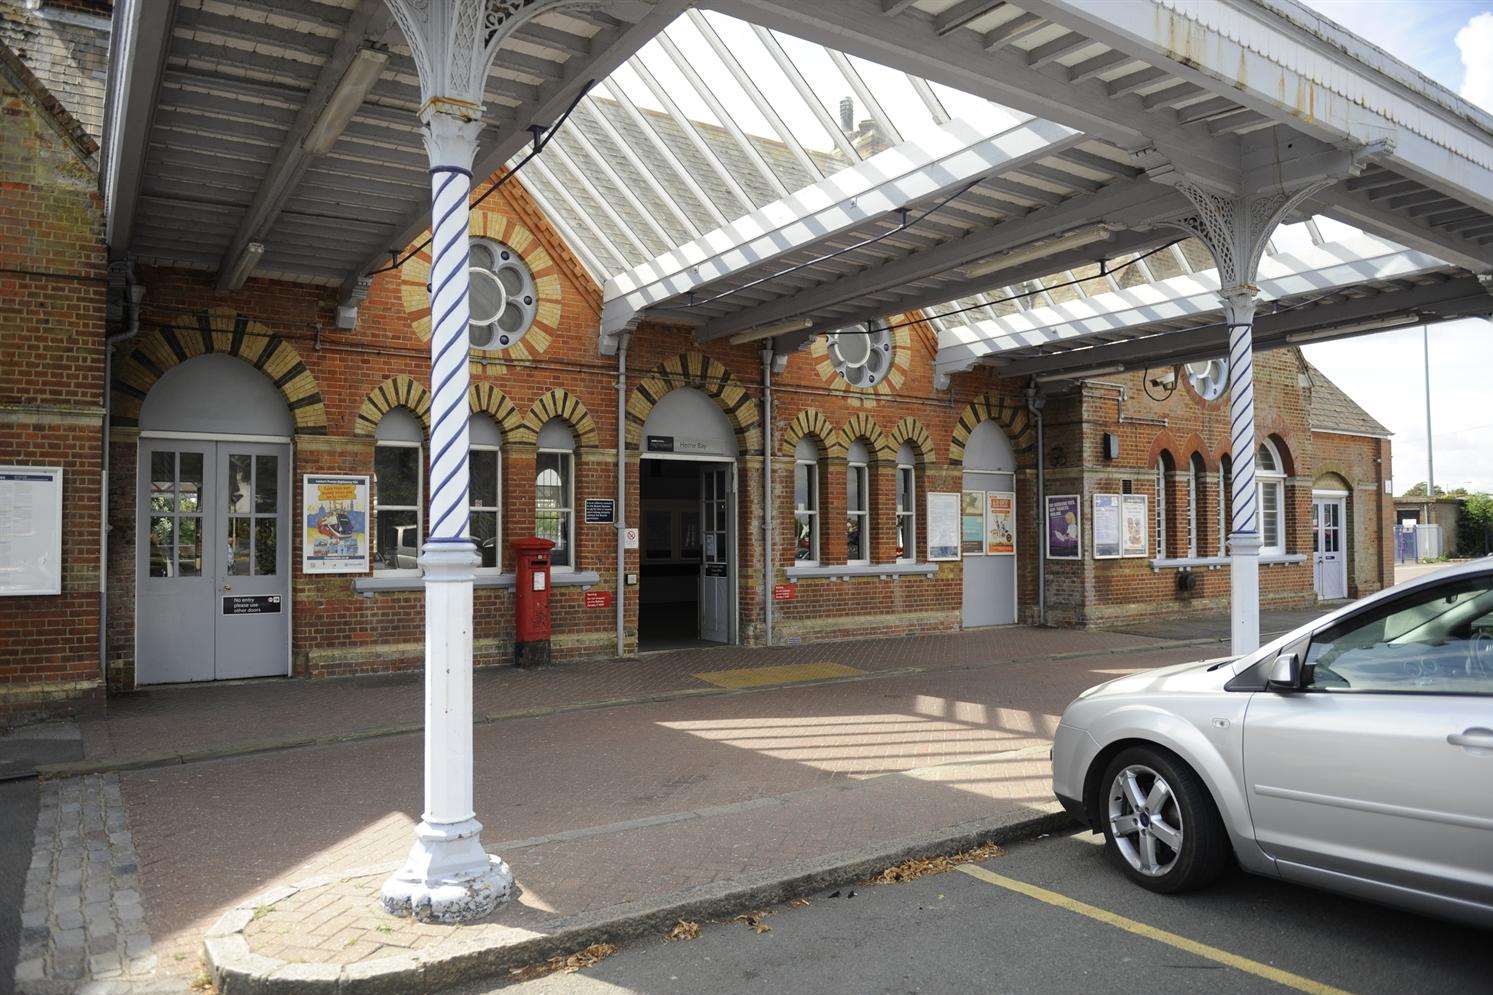 Paramedics were called to Herne Bay railway station